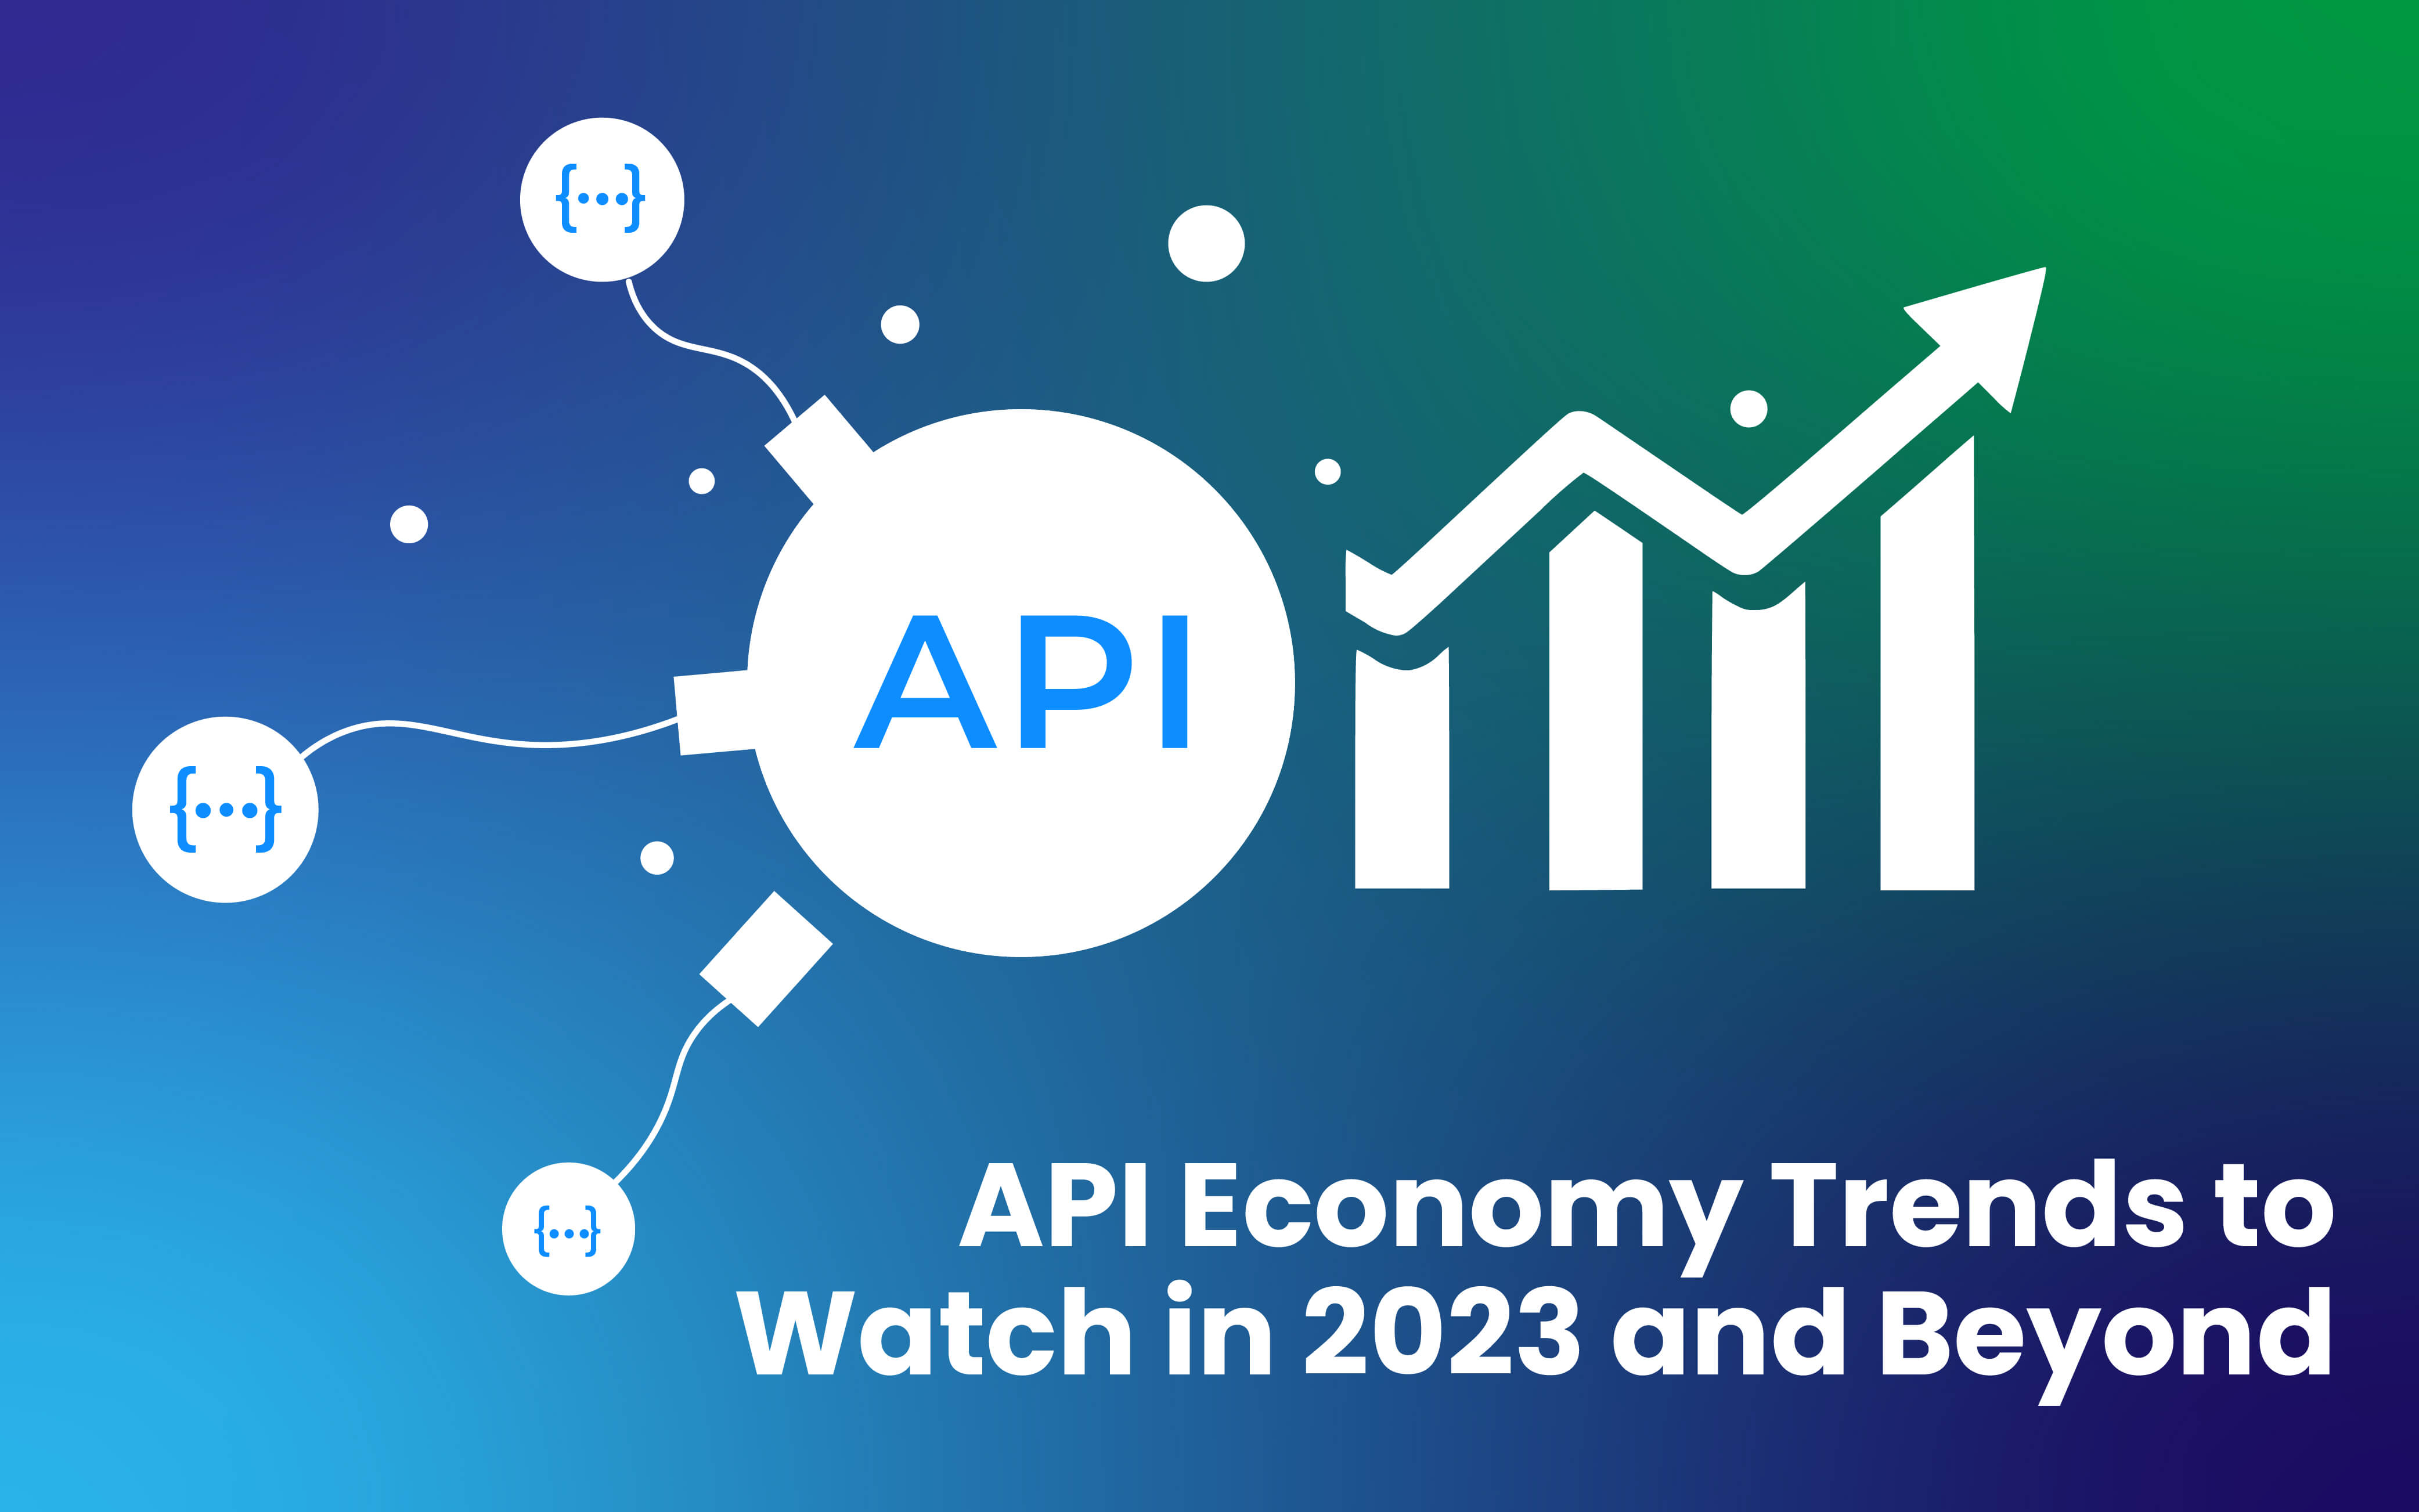 API Economy Trends to Watch in 2023 and Beyond